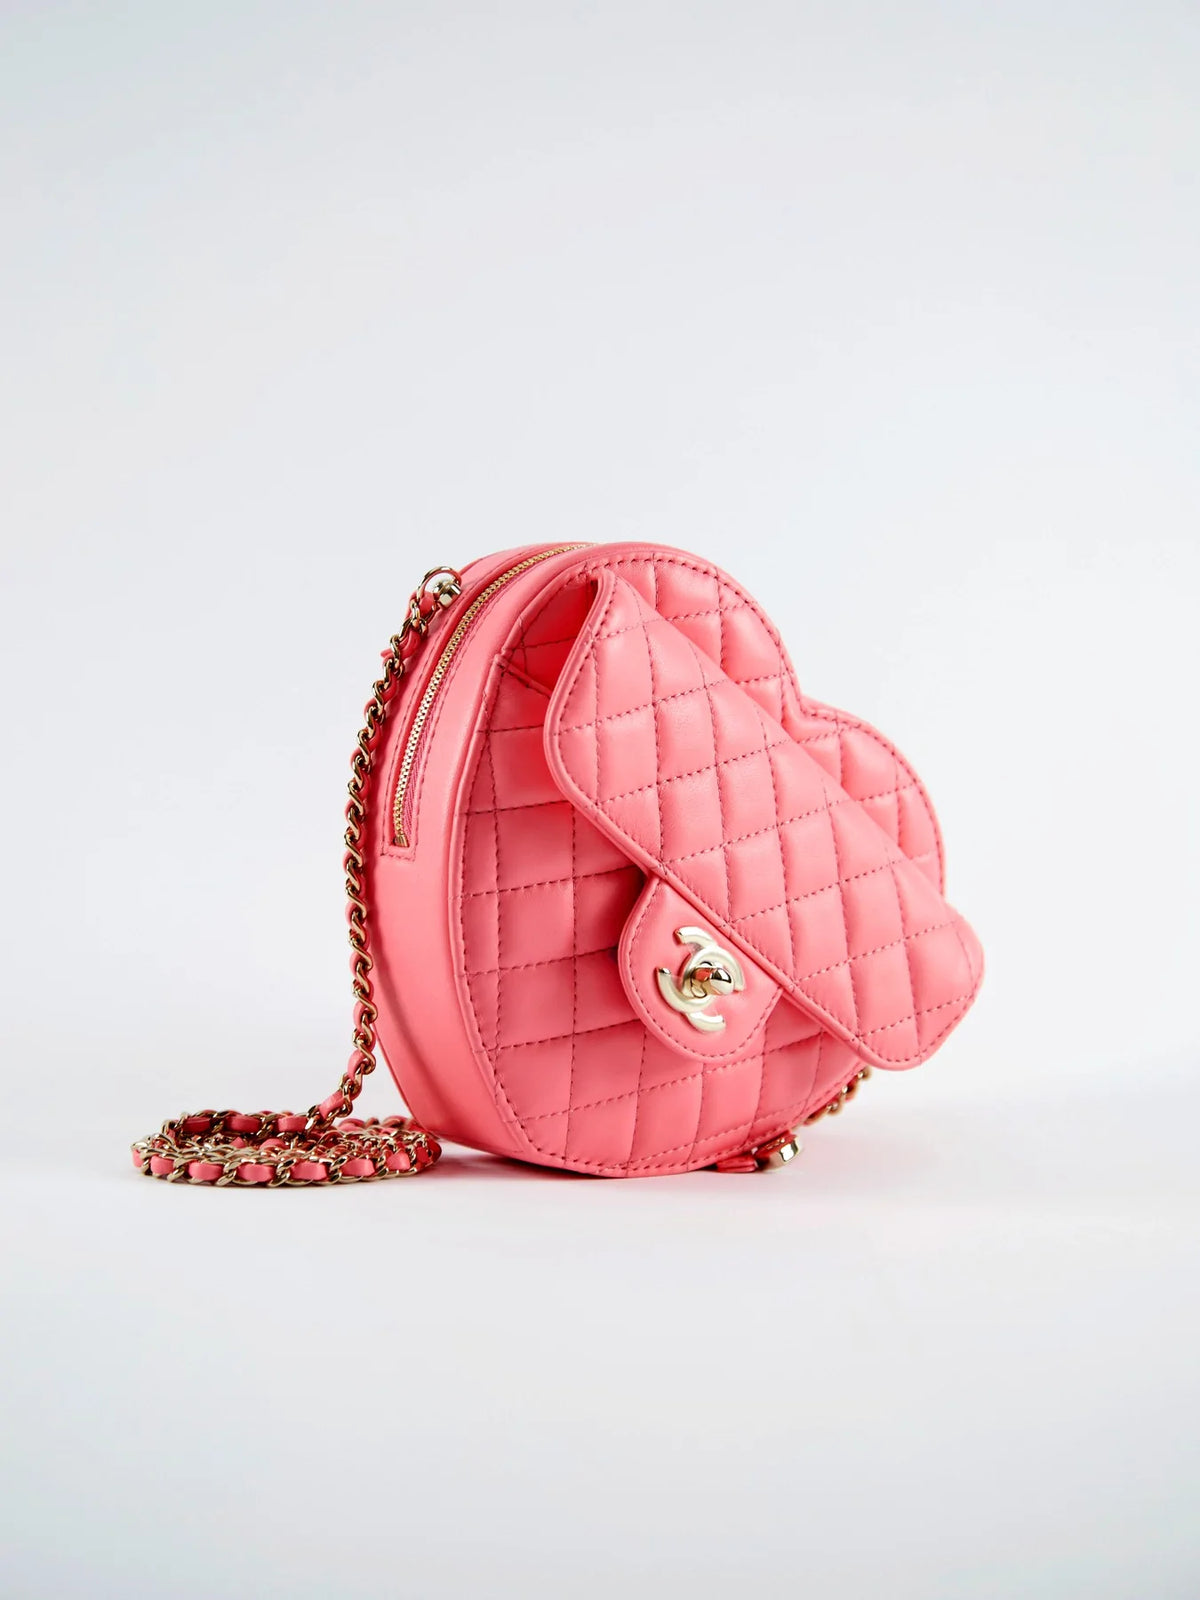 Chanel Heart Bag Pink (Large) Chanel - Shop for the best selection